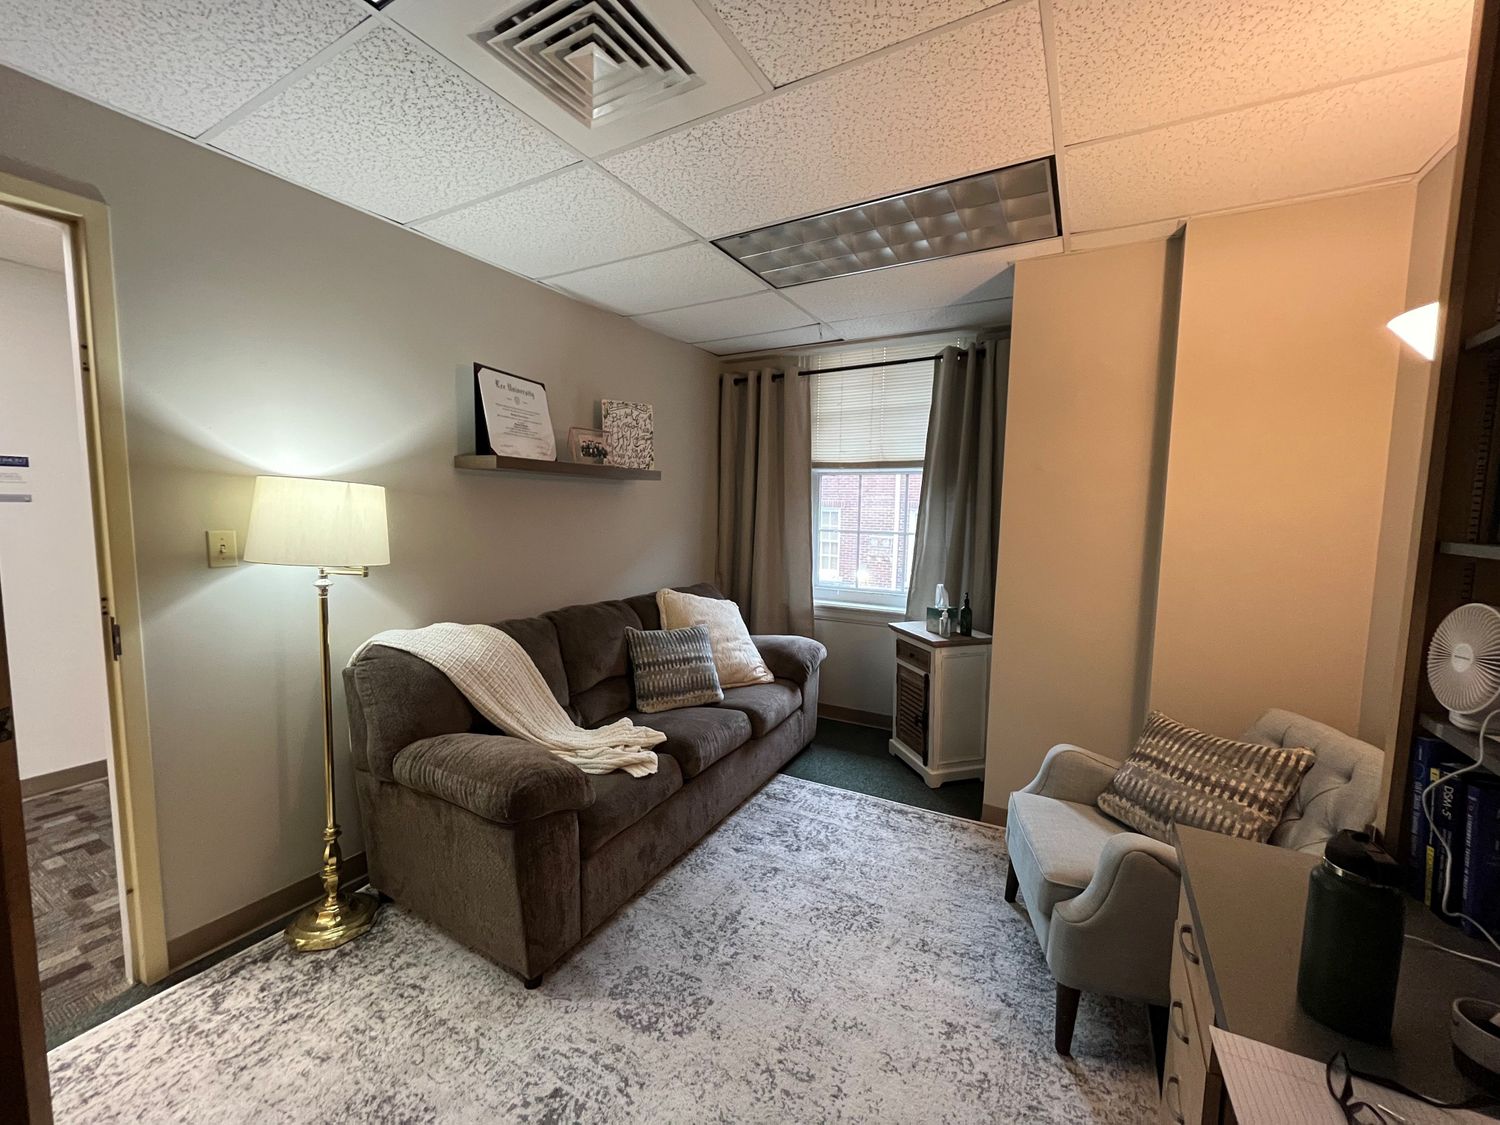 Gallery Photo of Private Office Located in Henegar Counseling Center